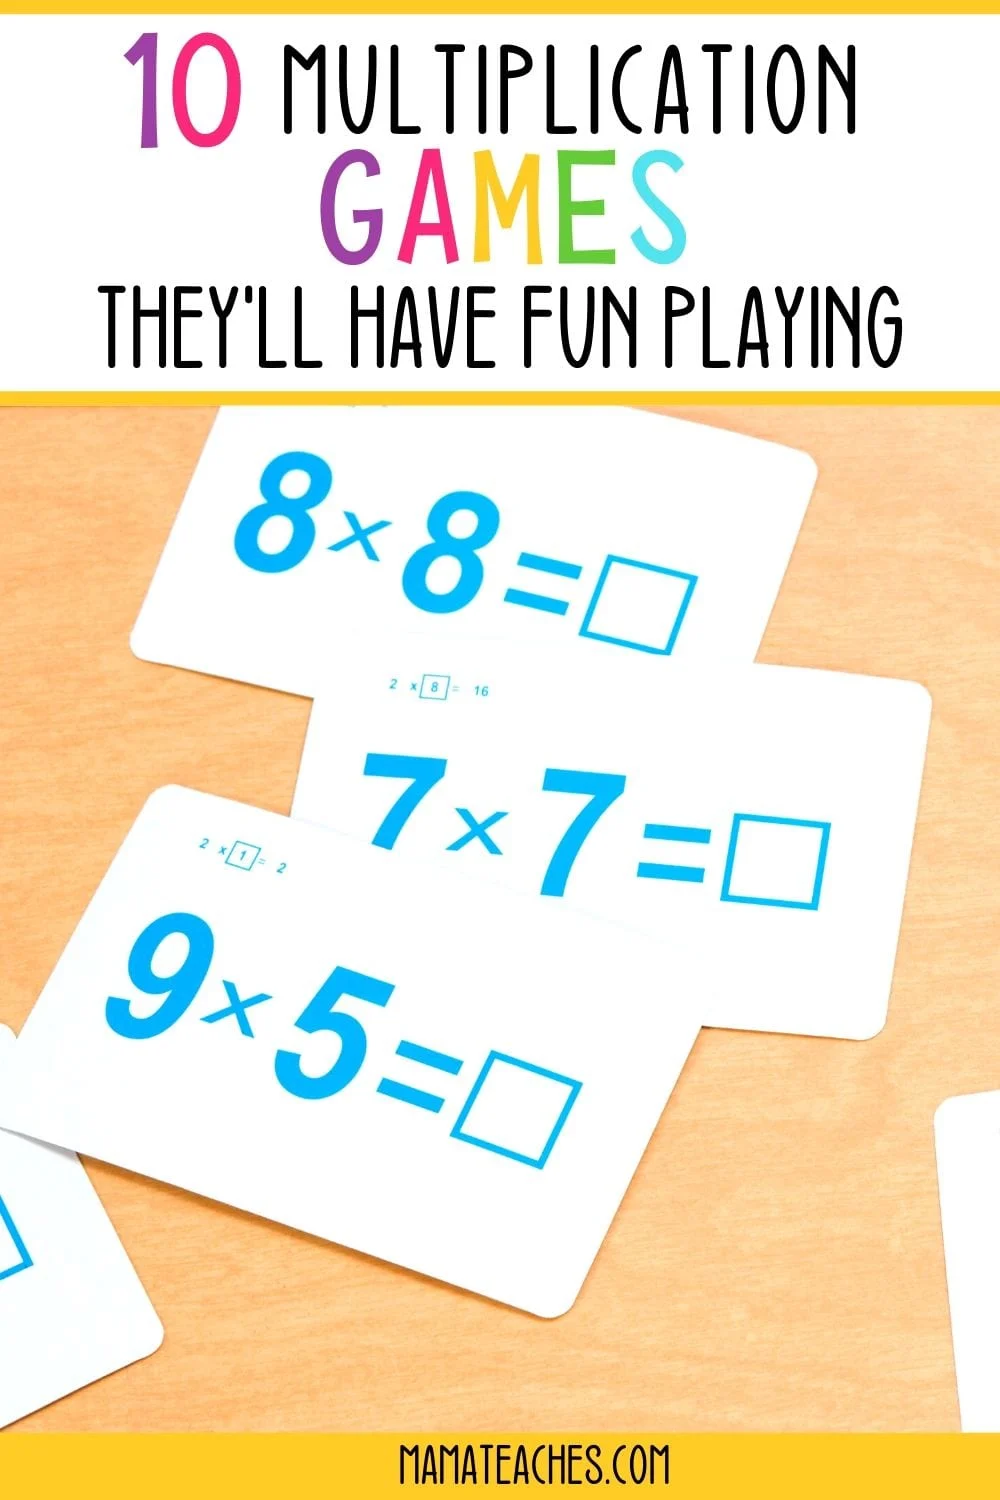 10 Multiplication Games They'll Have Fun Playing